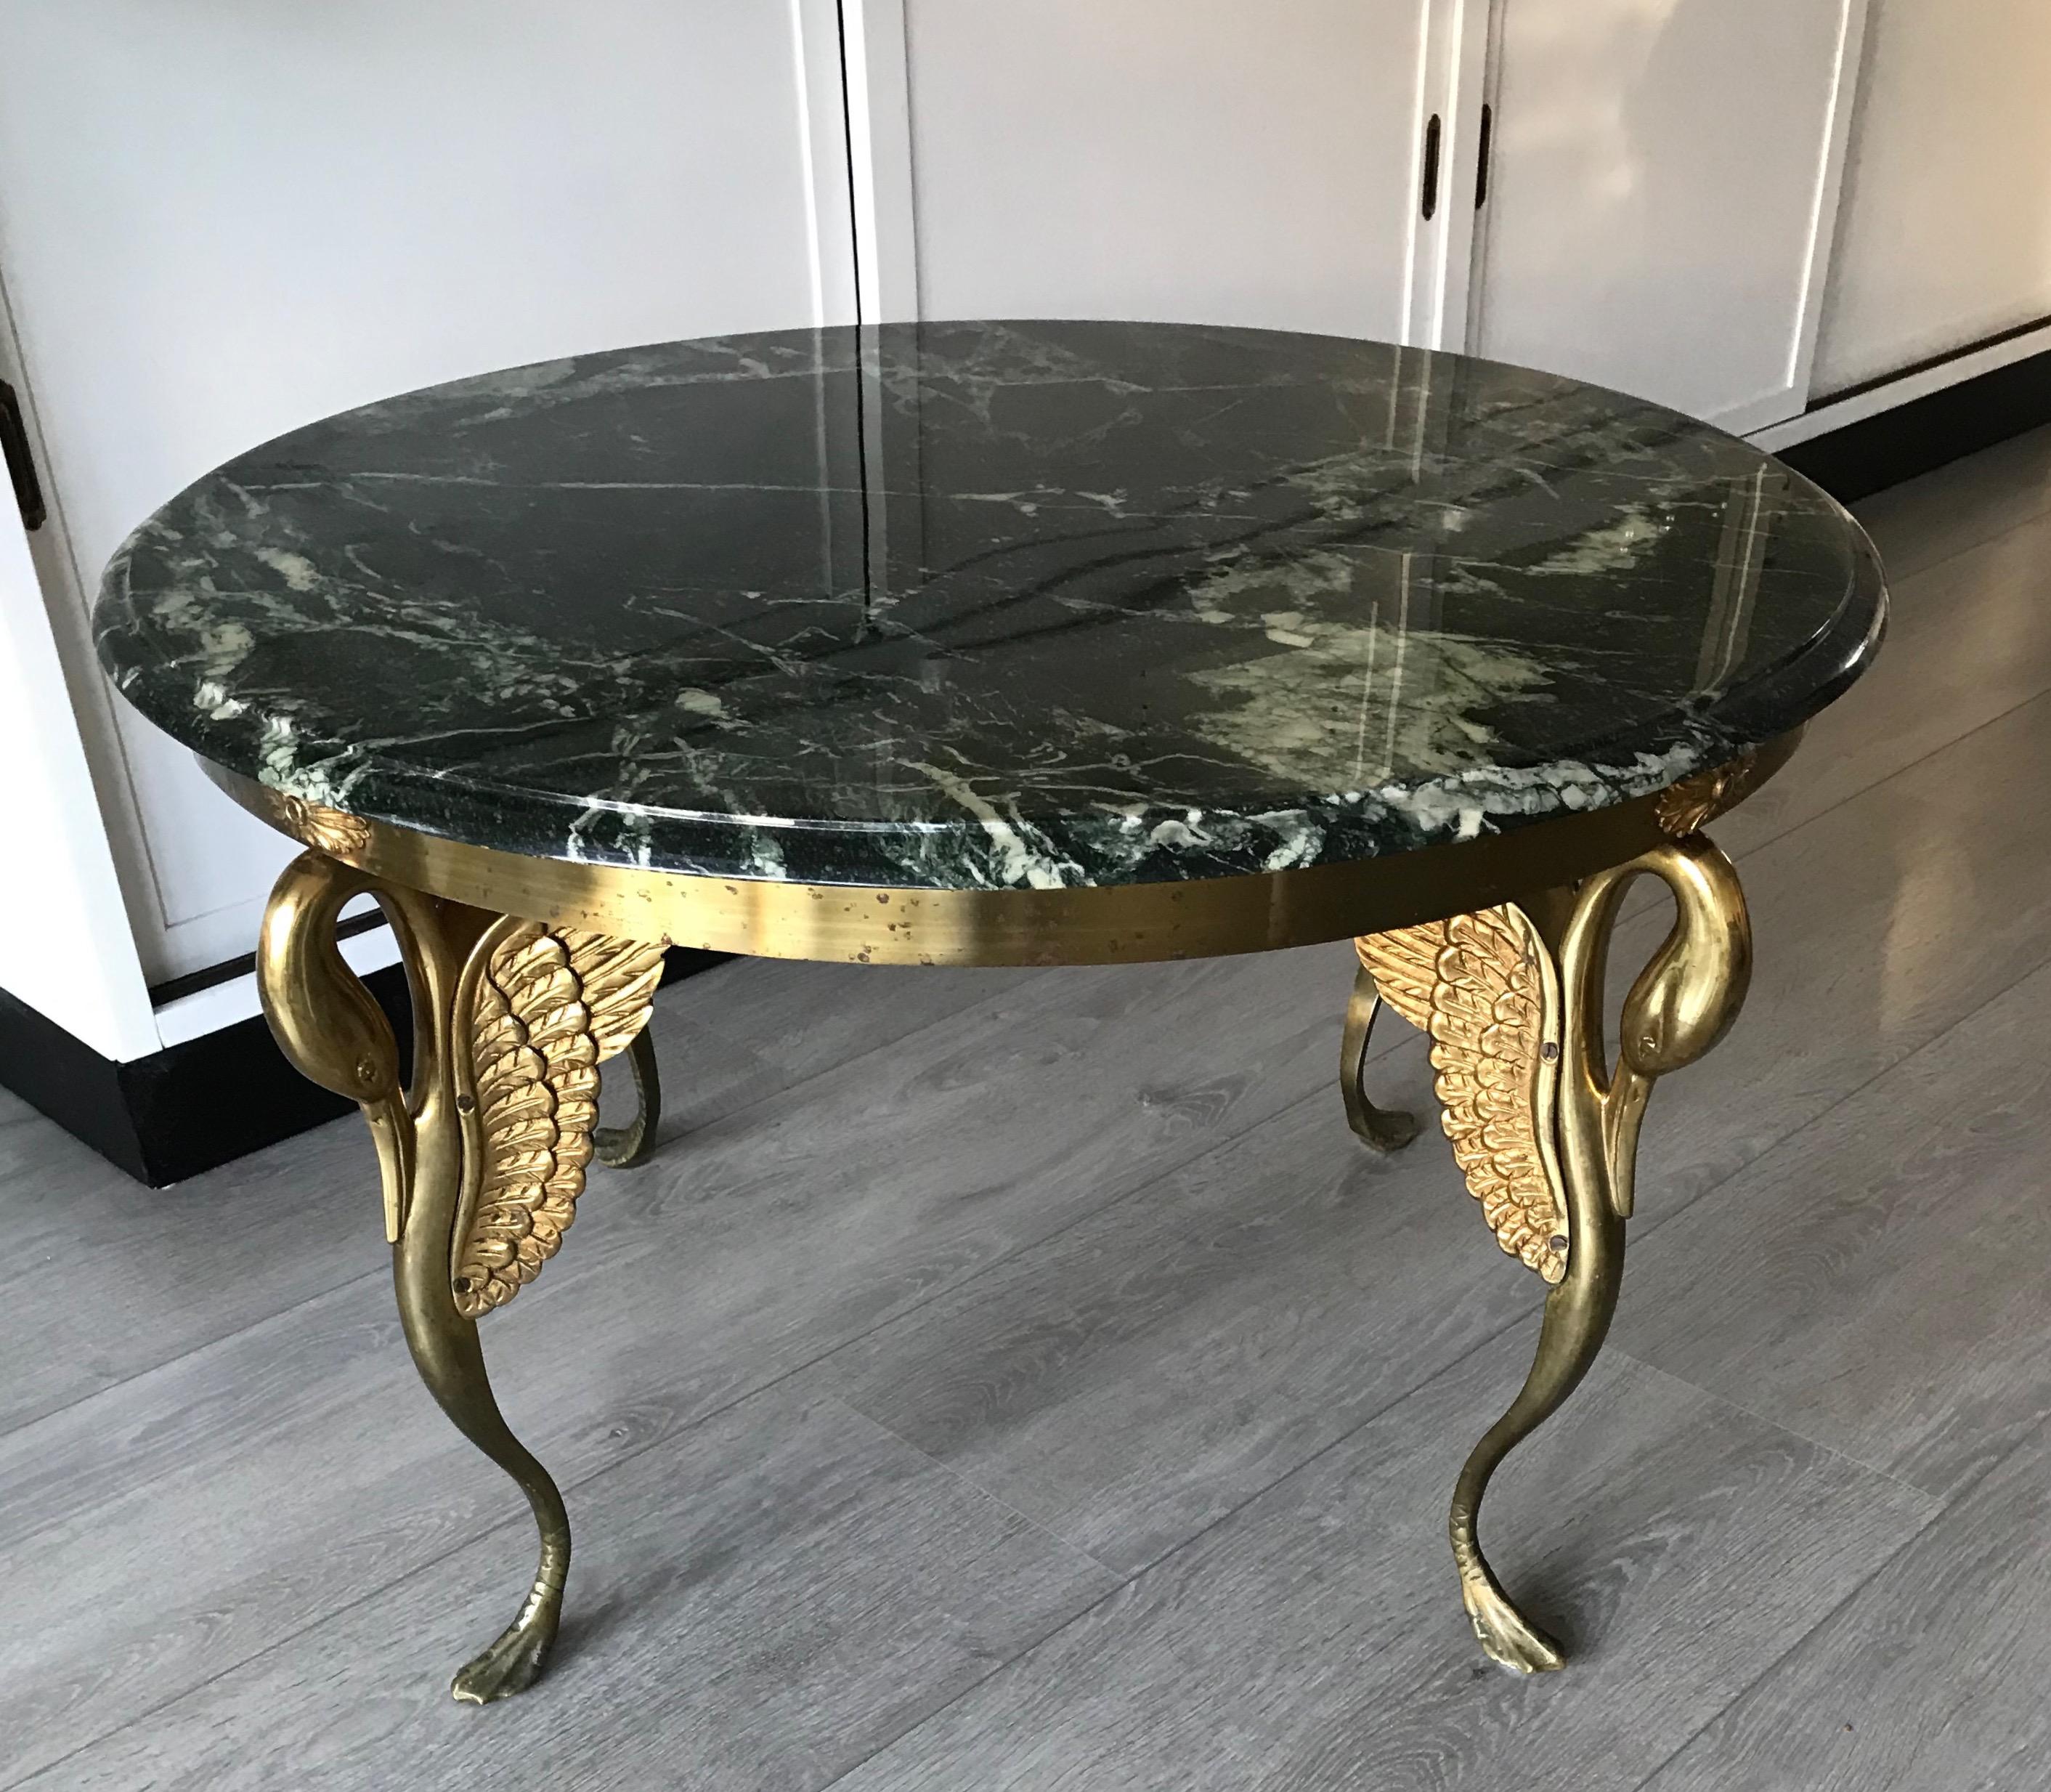 Midcentury Empire Style Coffee Table with Marble Top and Bronze Swan Sculptures 12